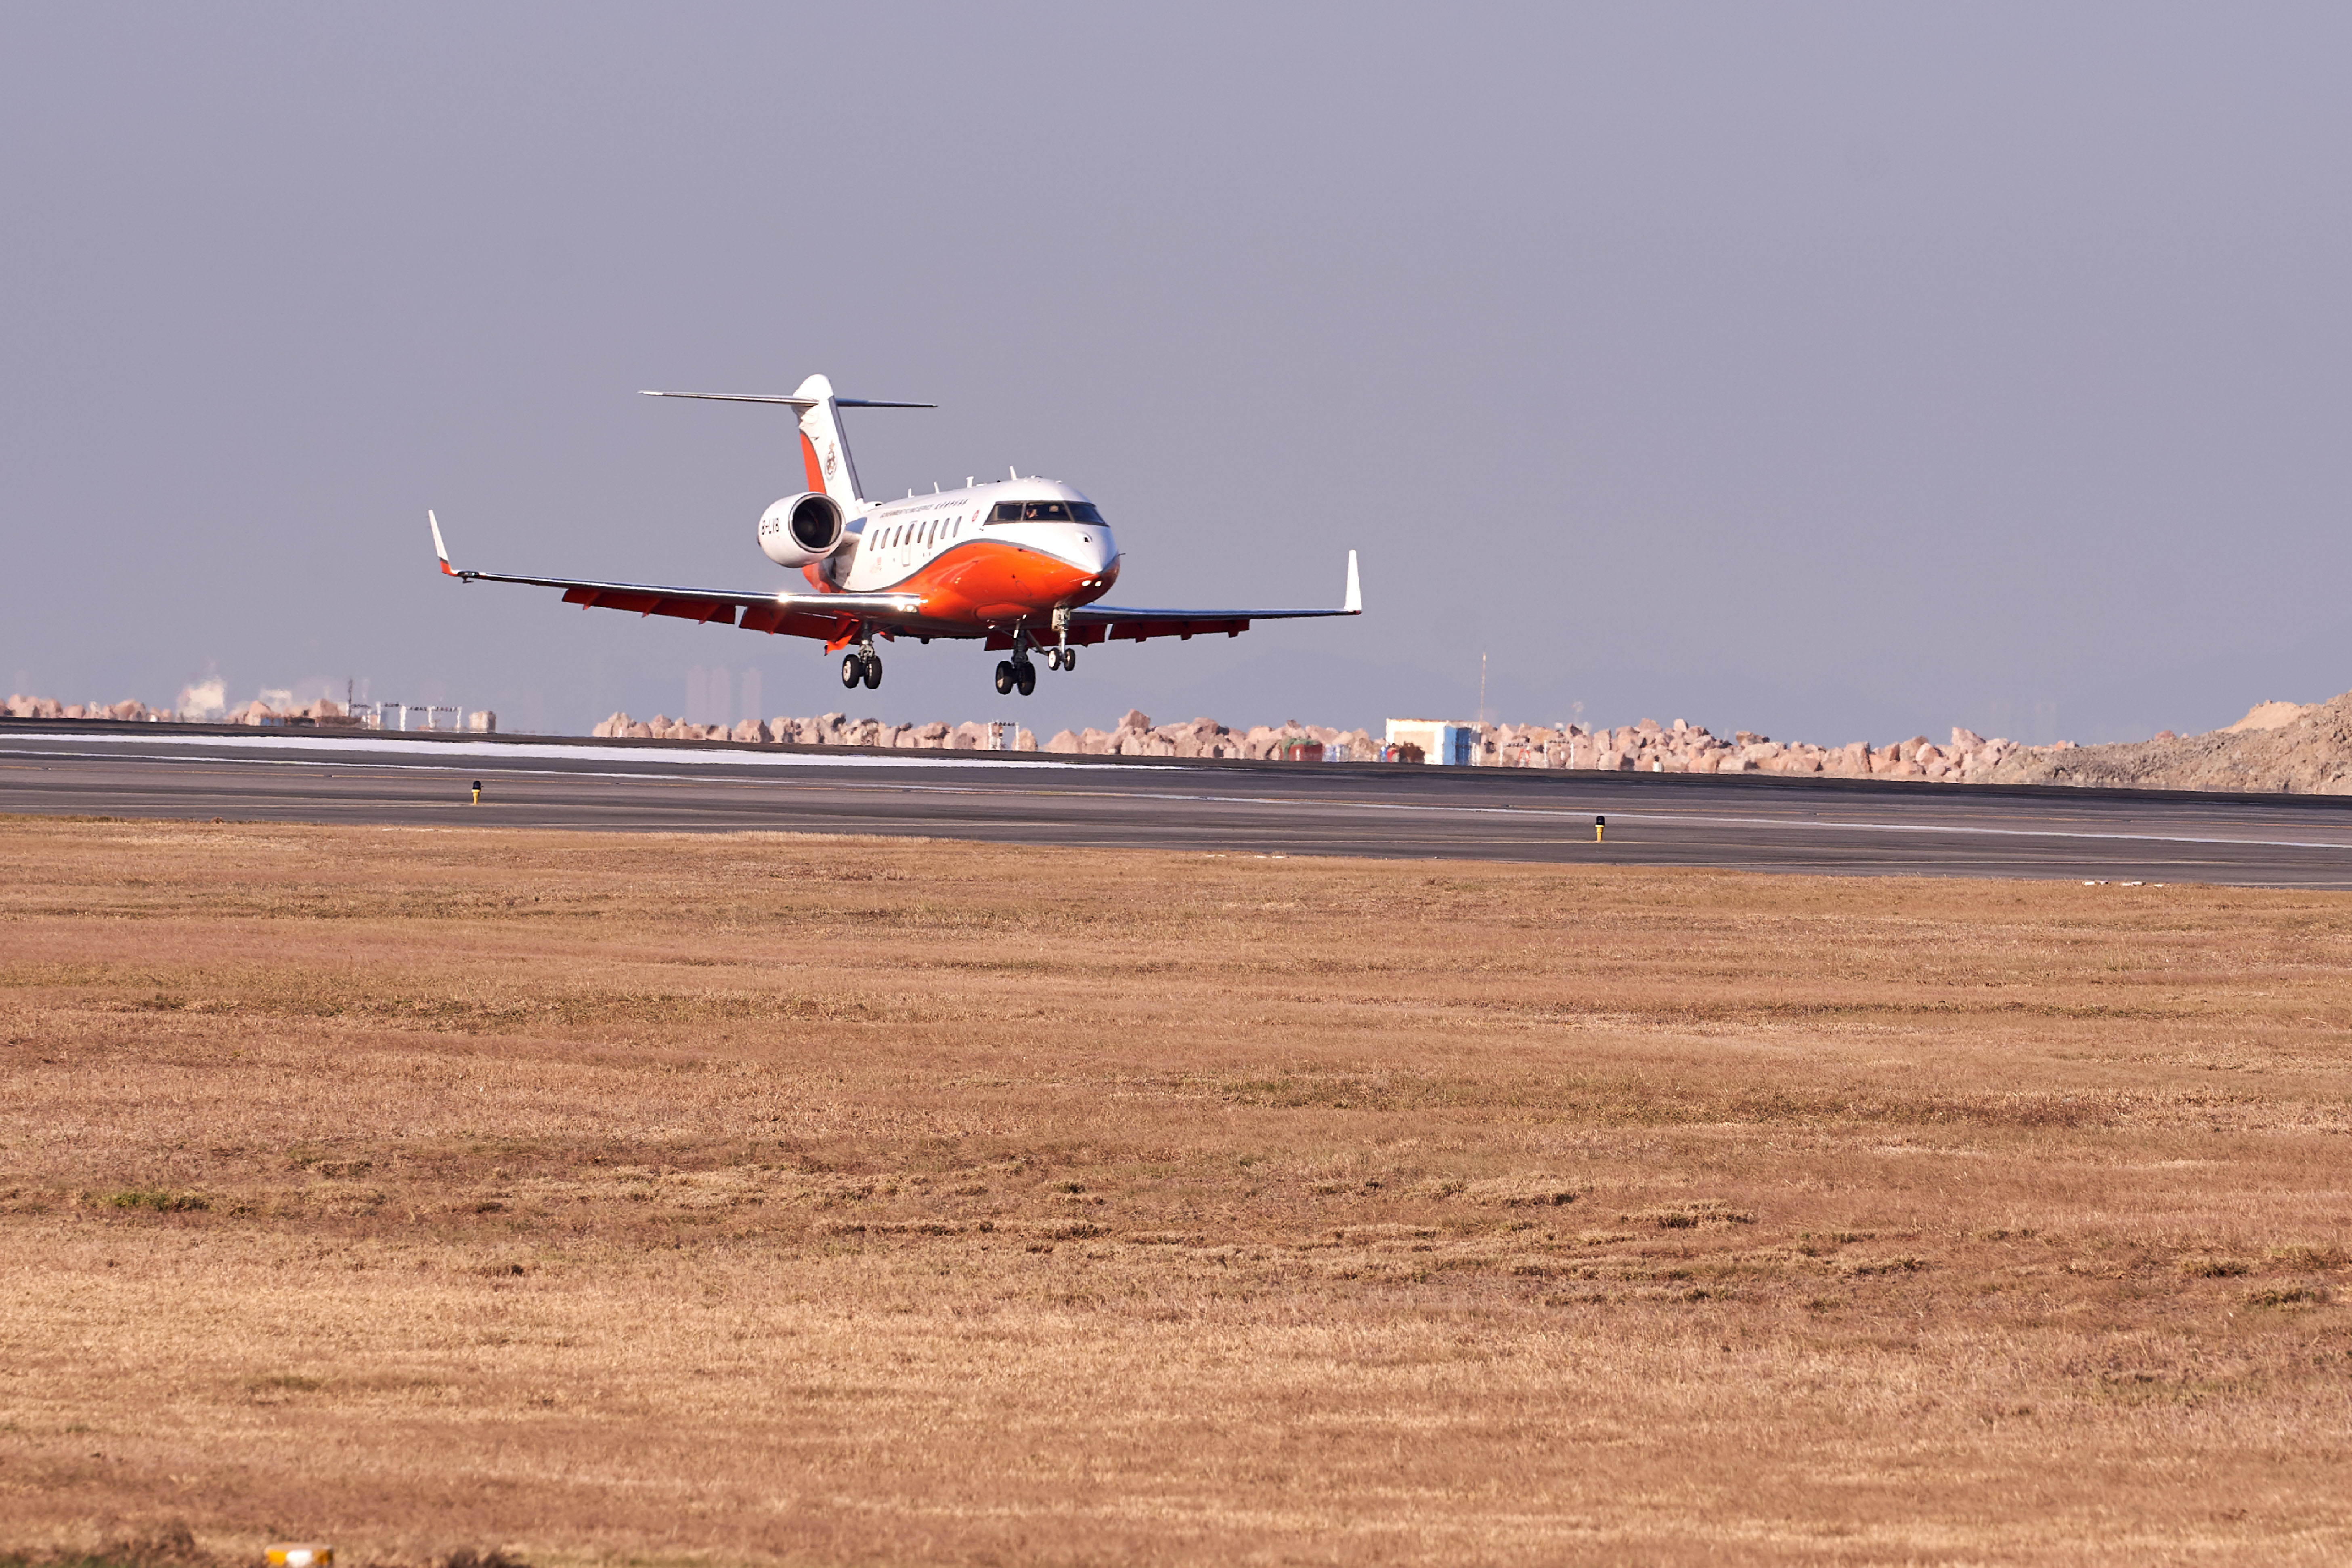 the first aircraft lands on the Centre Runway.